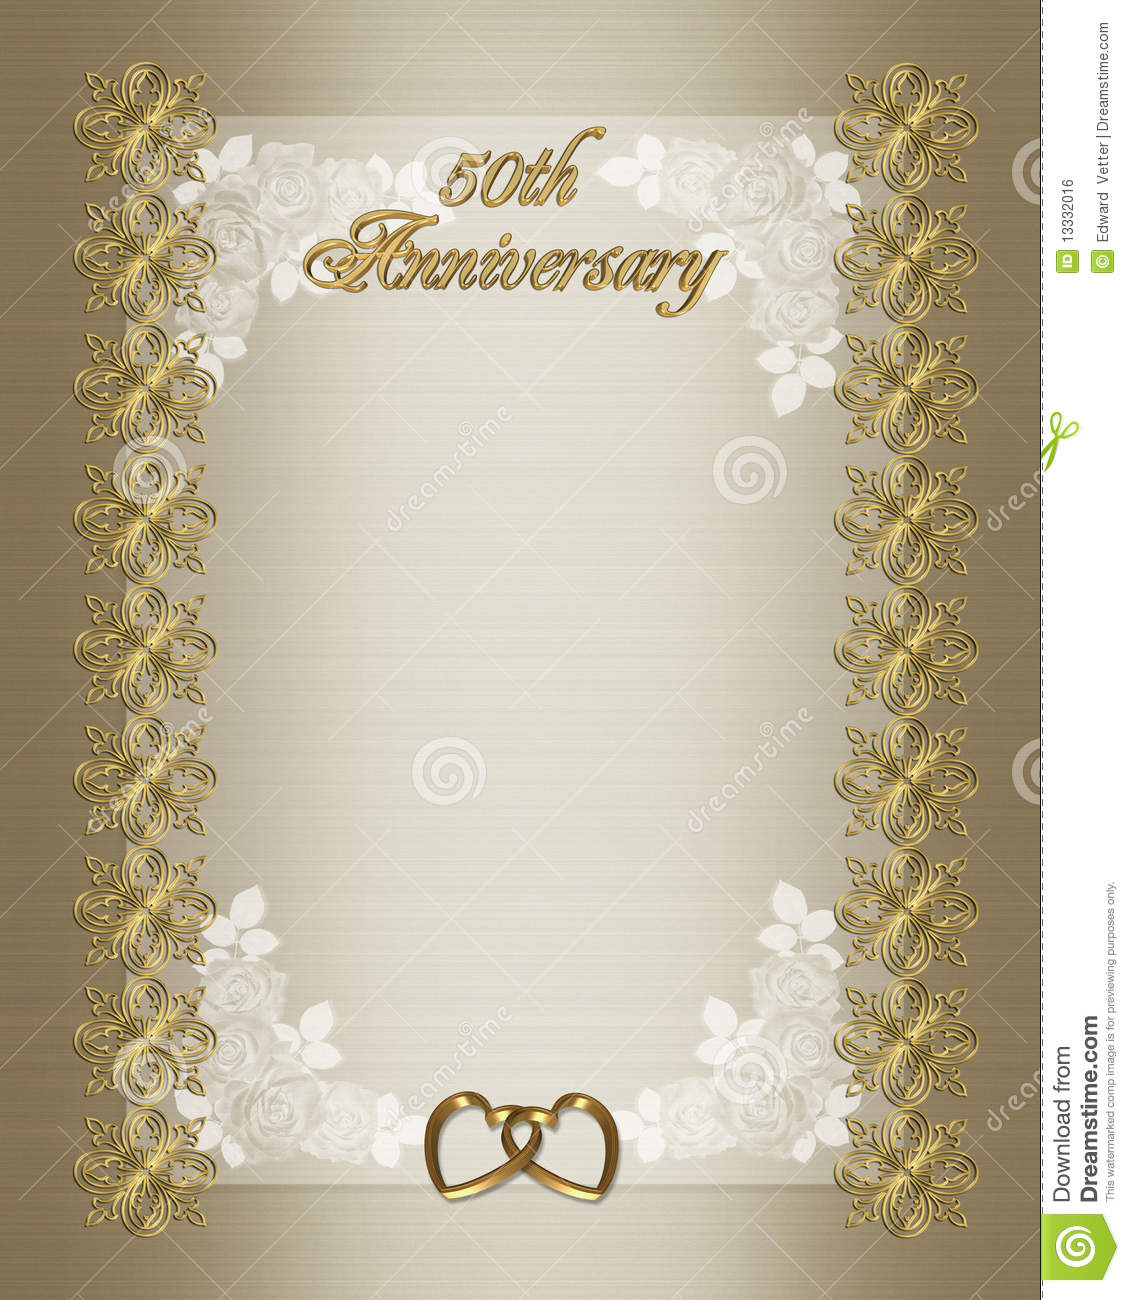 50th Wedding Anniversary Invitation Template Stock Illustration throughout proportions 1130 X 1300